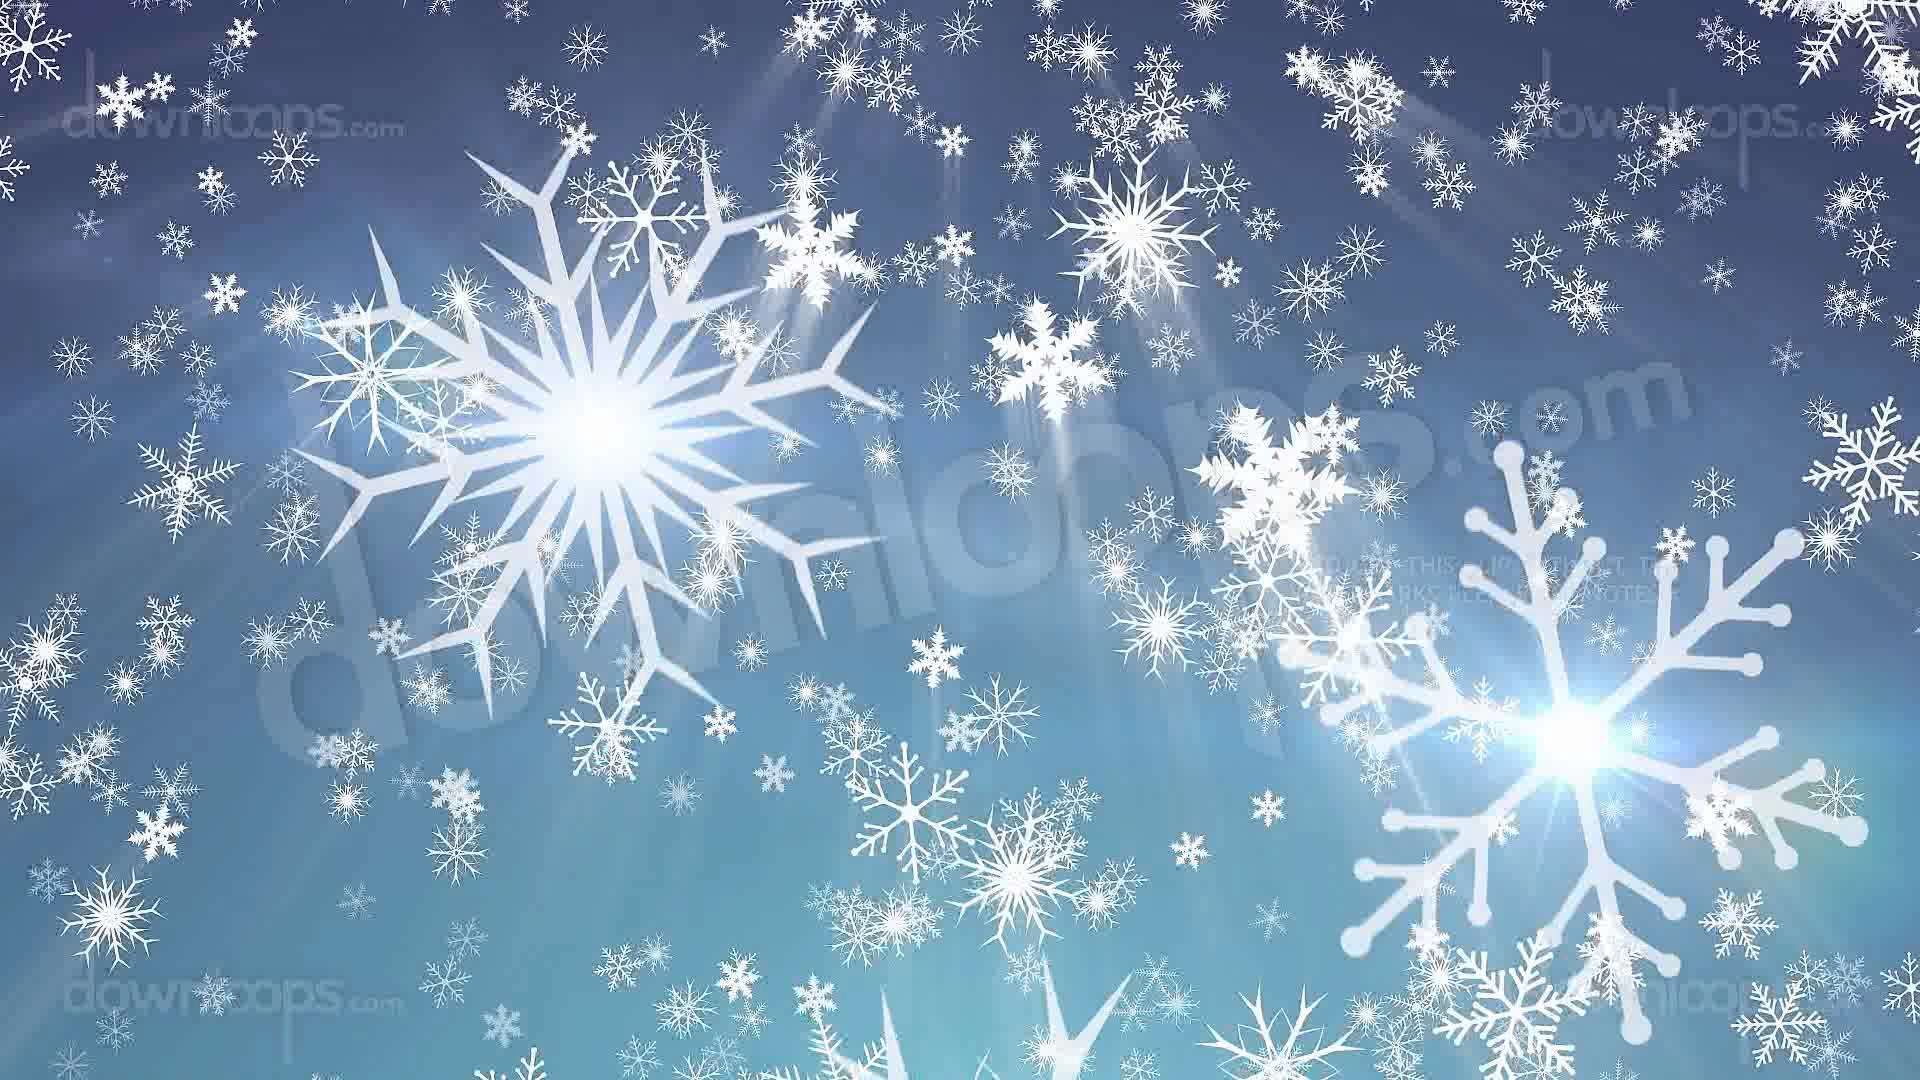 Falling Snow Animated Wallpaper Images